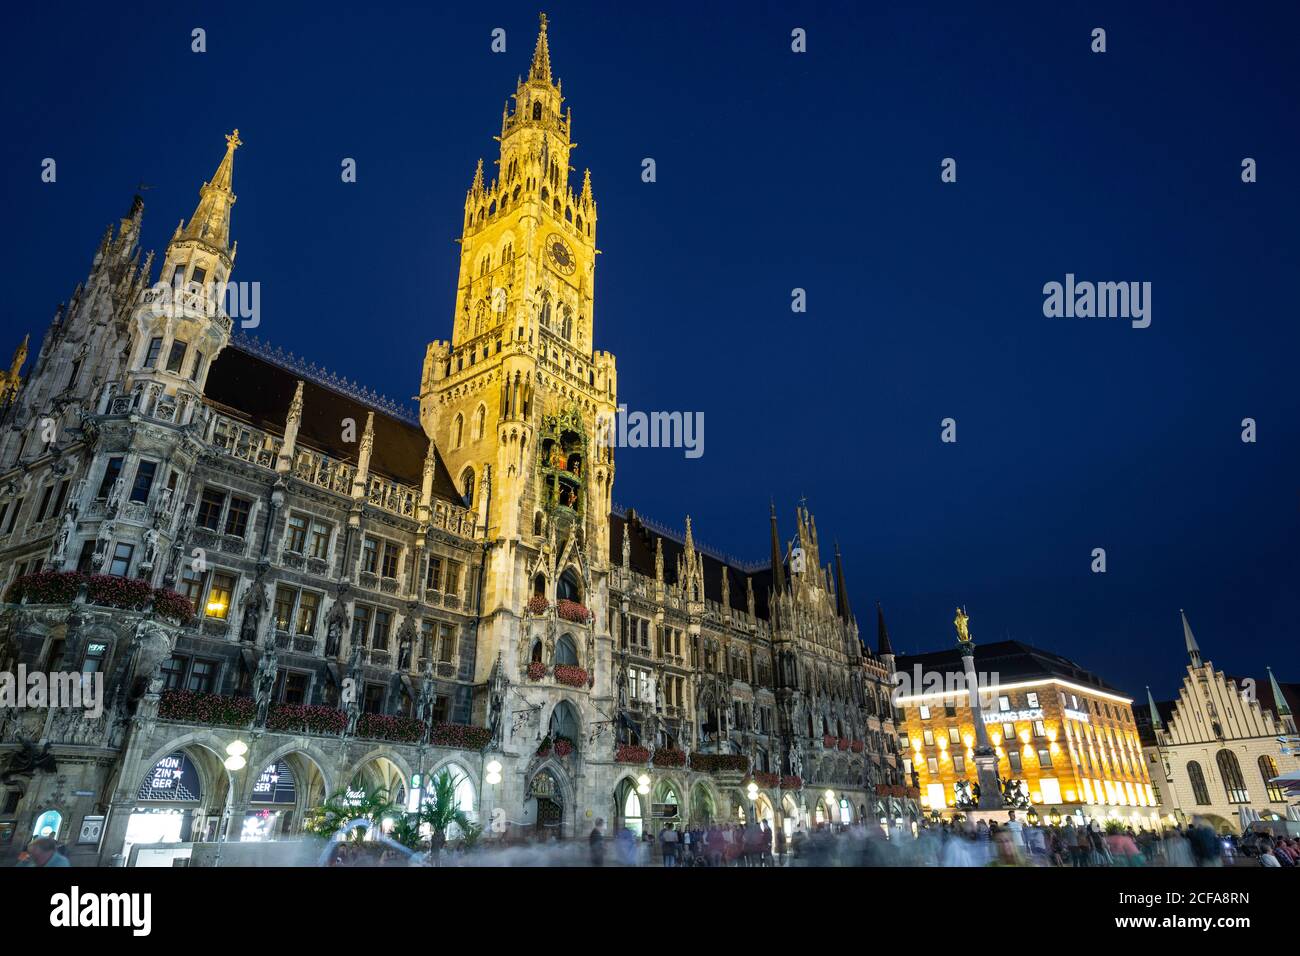 New Town Hall (featuring clock tower and Glockenspiel) and crowd, Marienplatz, Munich, Germany Stock Photo